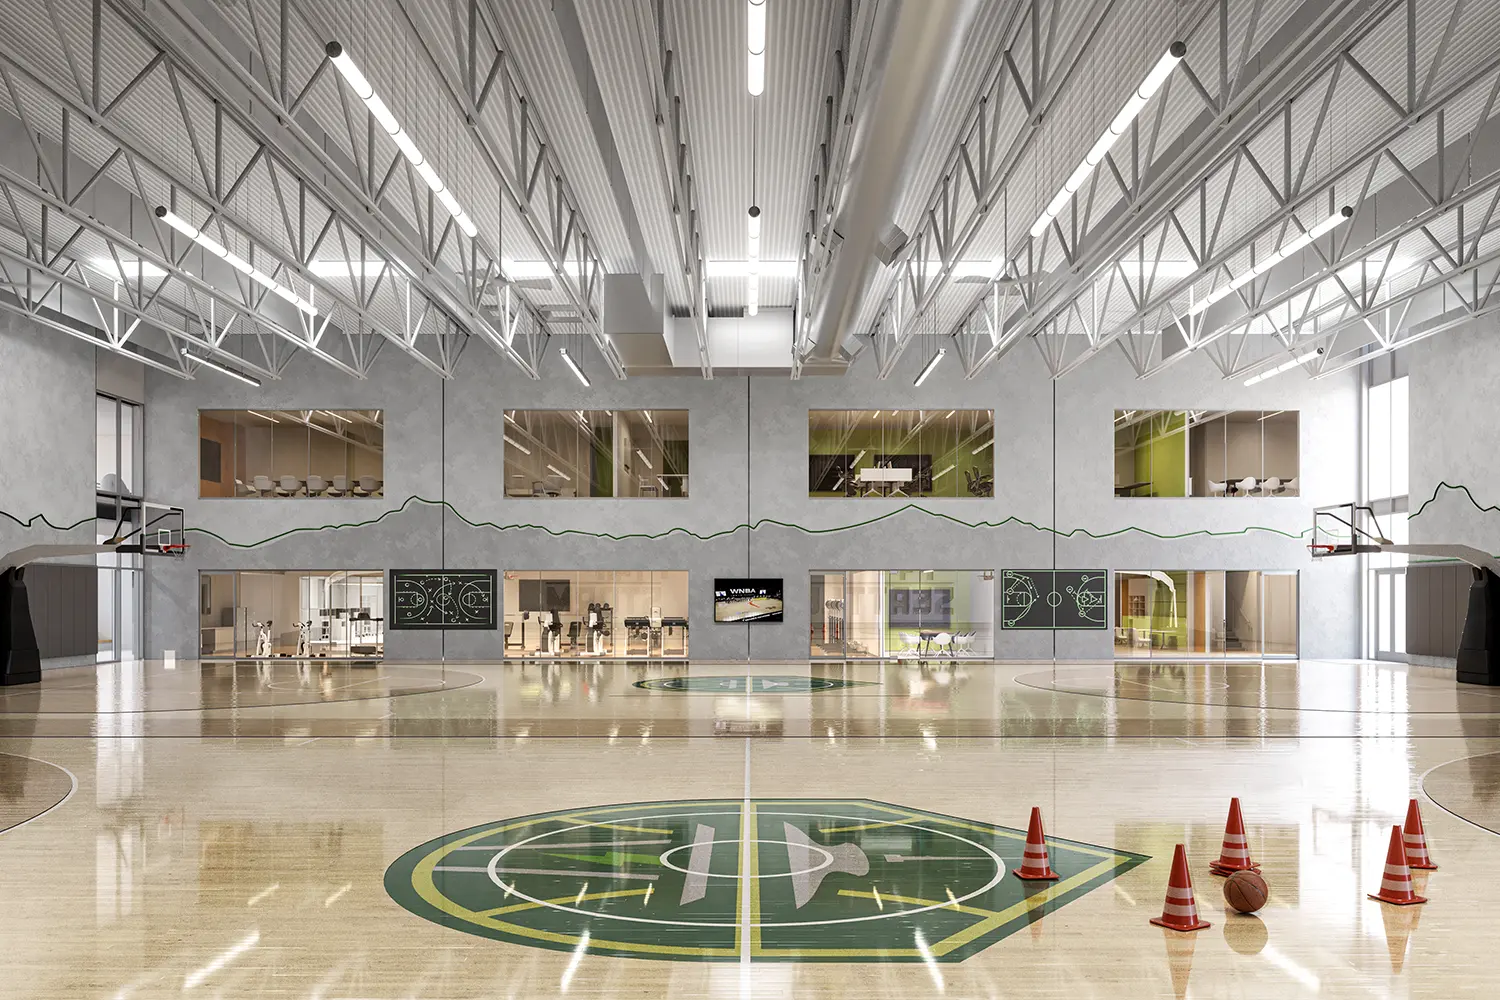 Seattle Storm Practice Center Renderings by ZGF Architects